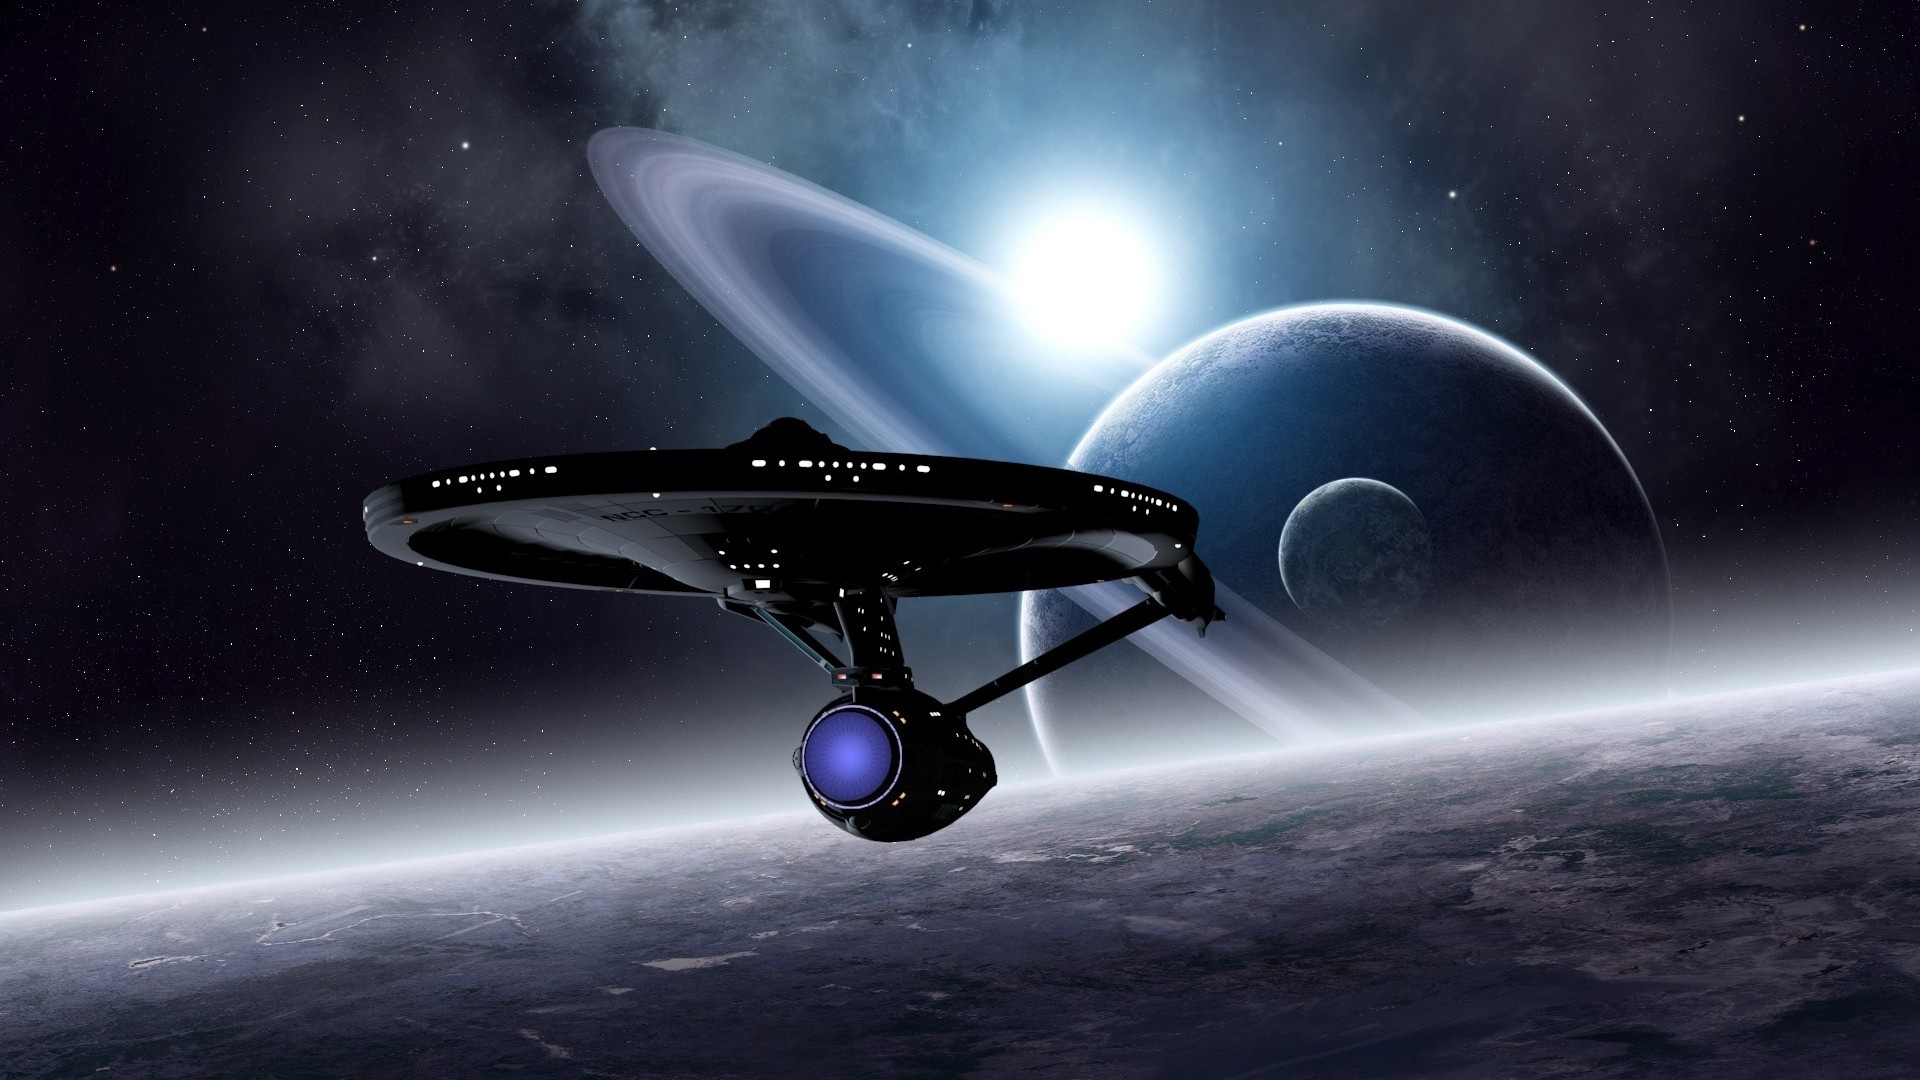 The Universe Space Spaceship Wallpaper - Space Ship In The Universe - HD Wallpaper 